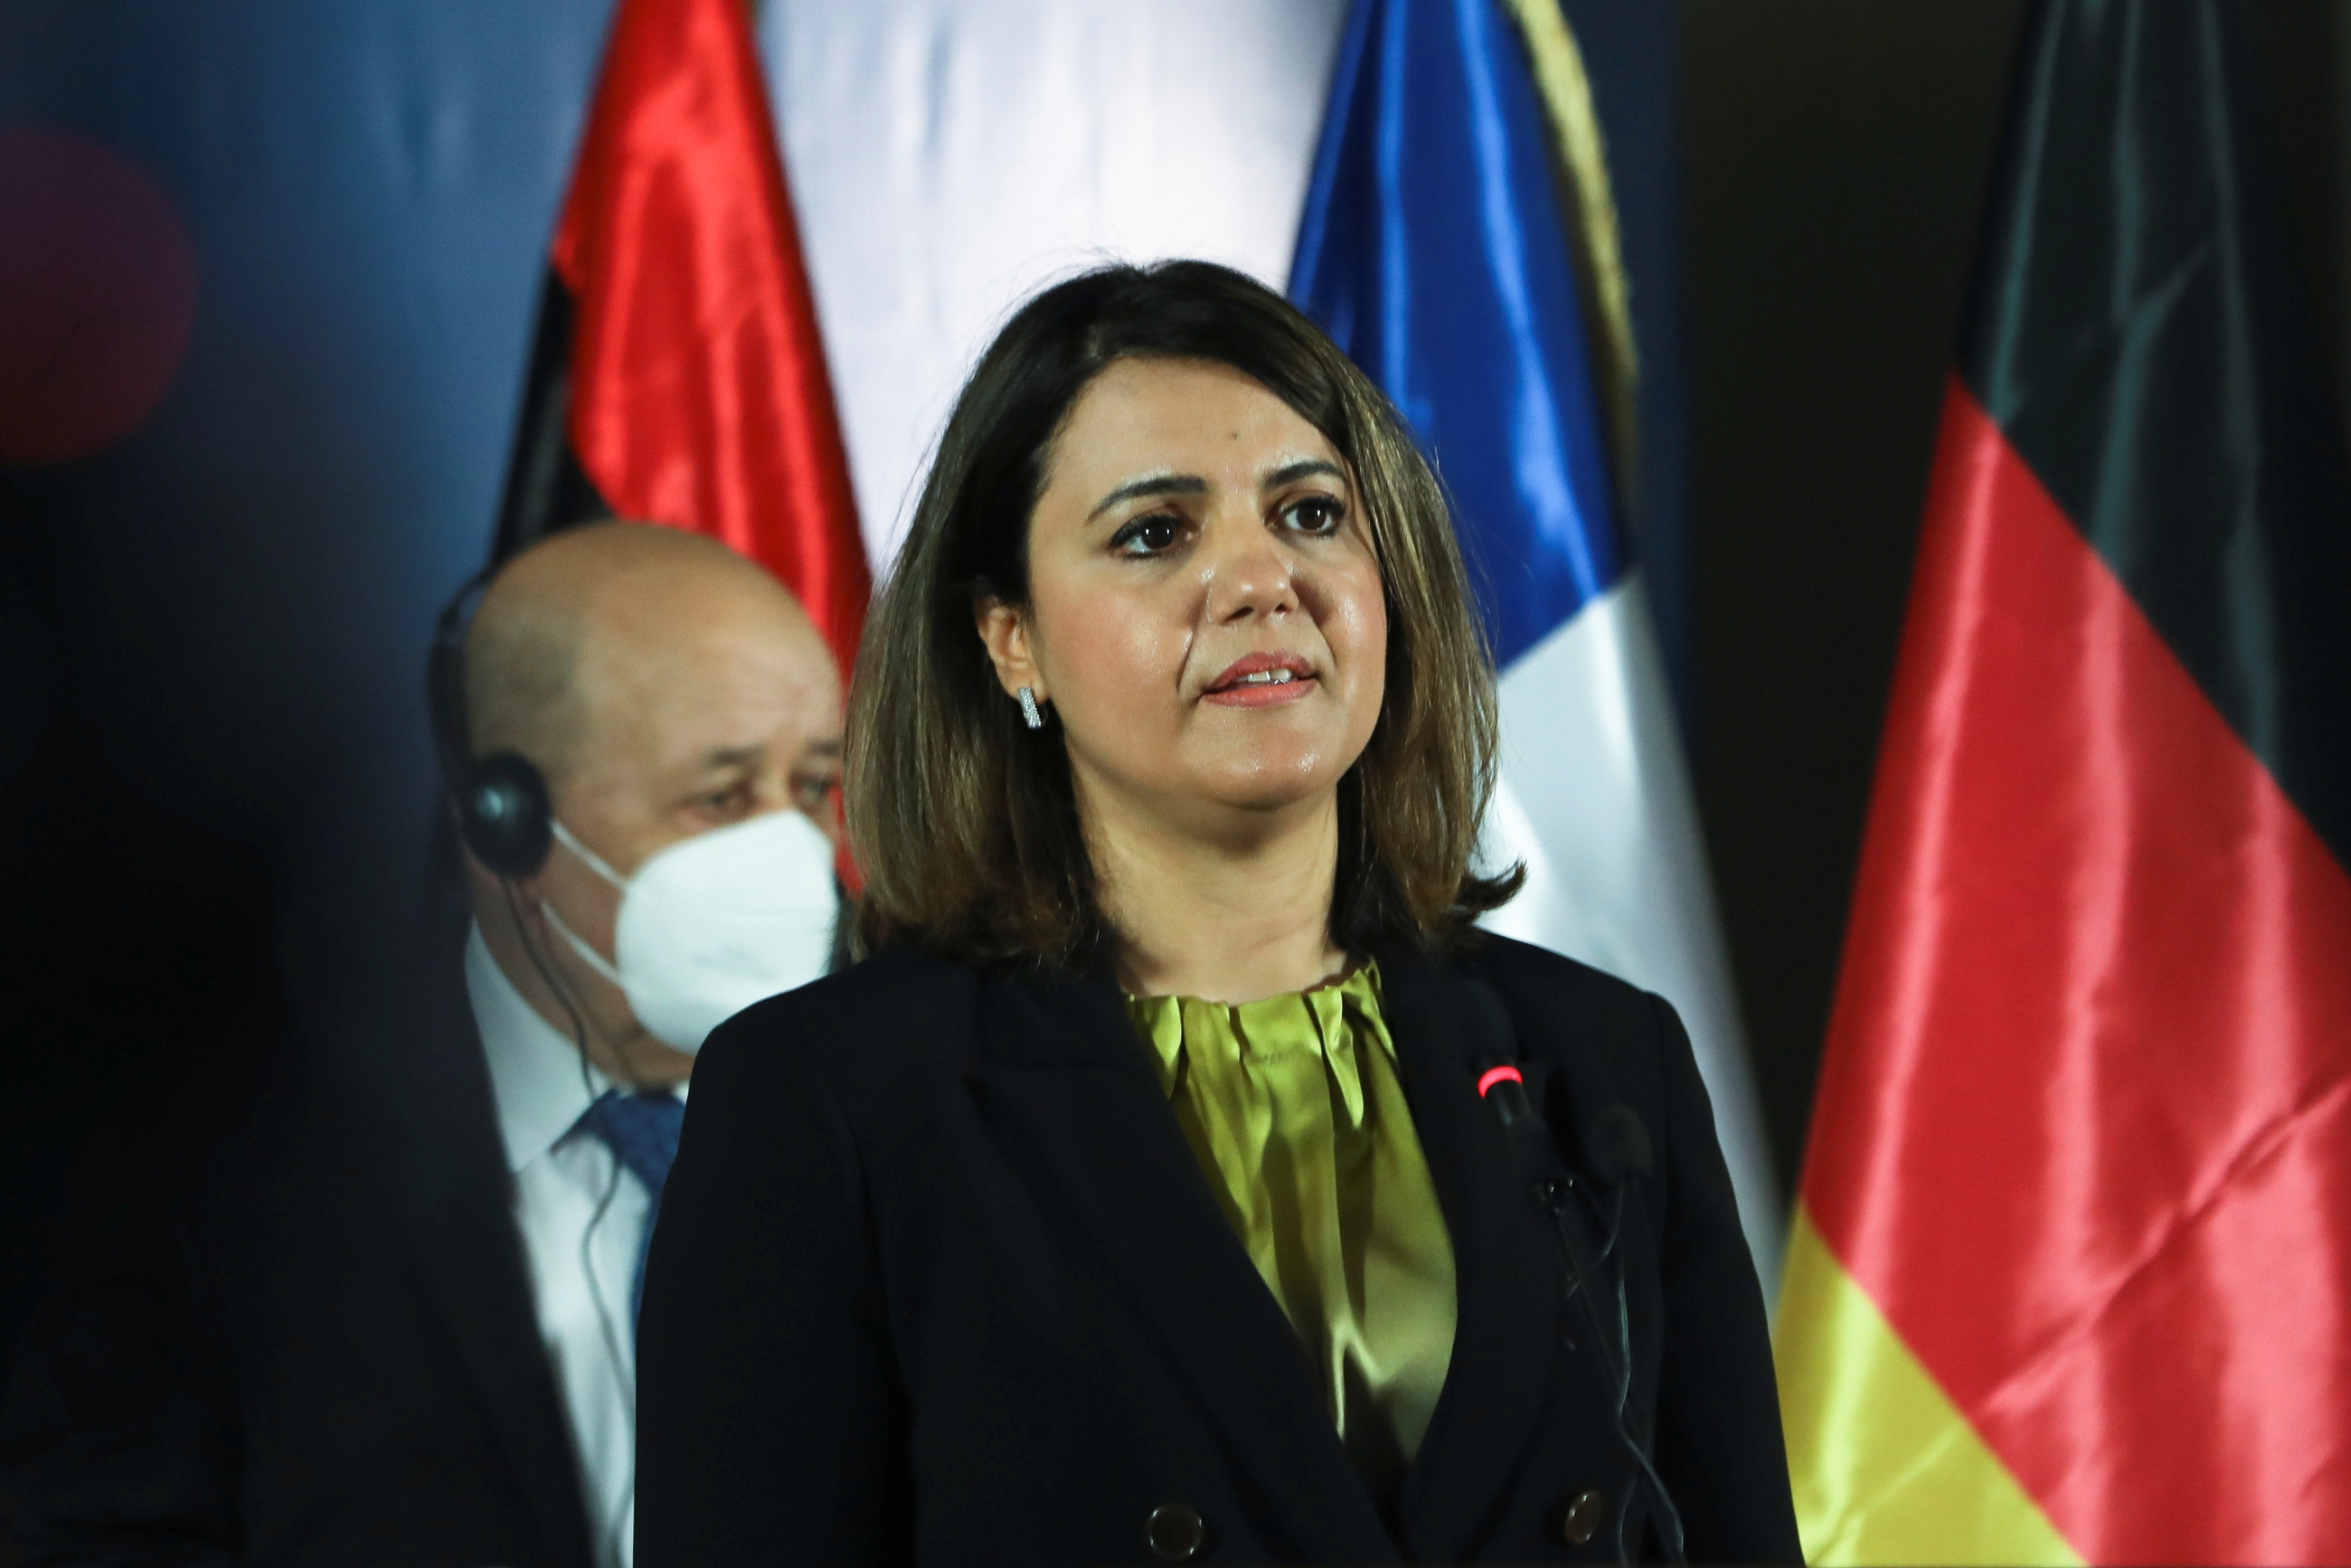 Libyan Foreign Minister Najla al-Mangoush spoke at a news conference in Tripoli, joined by her French, German and Italian counterparts.